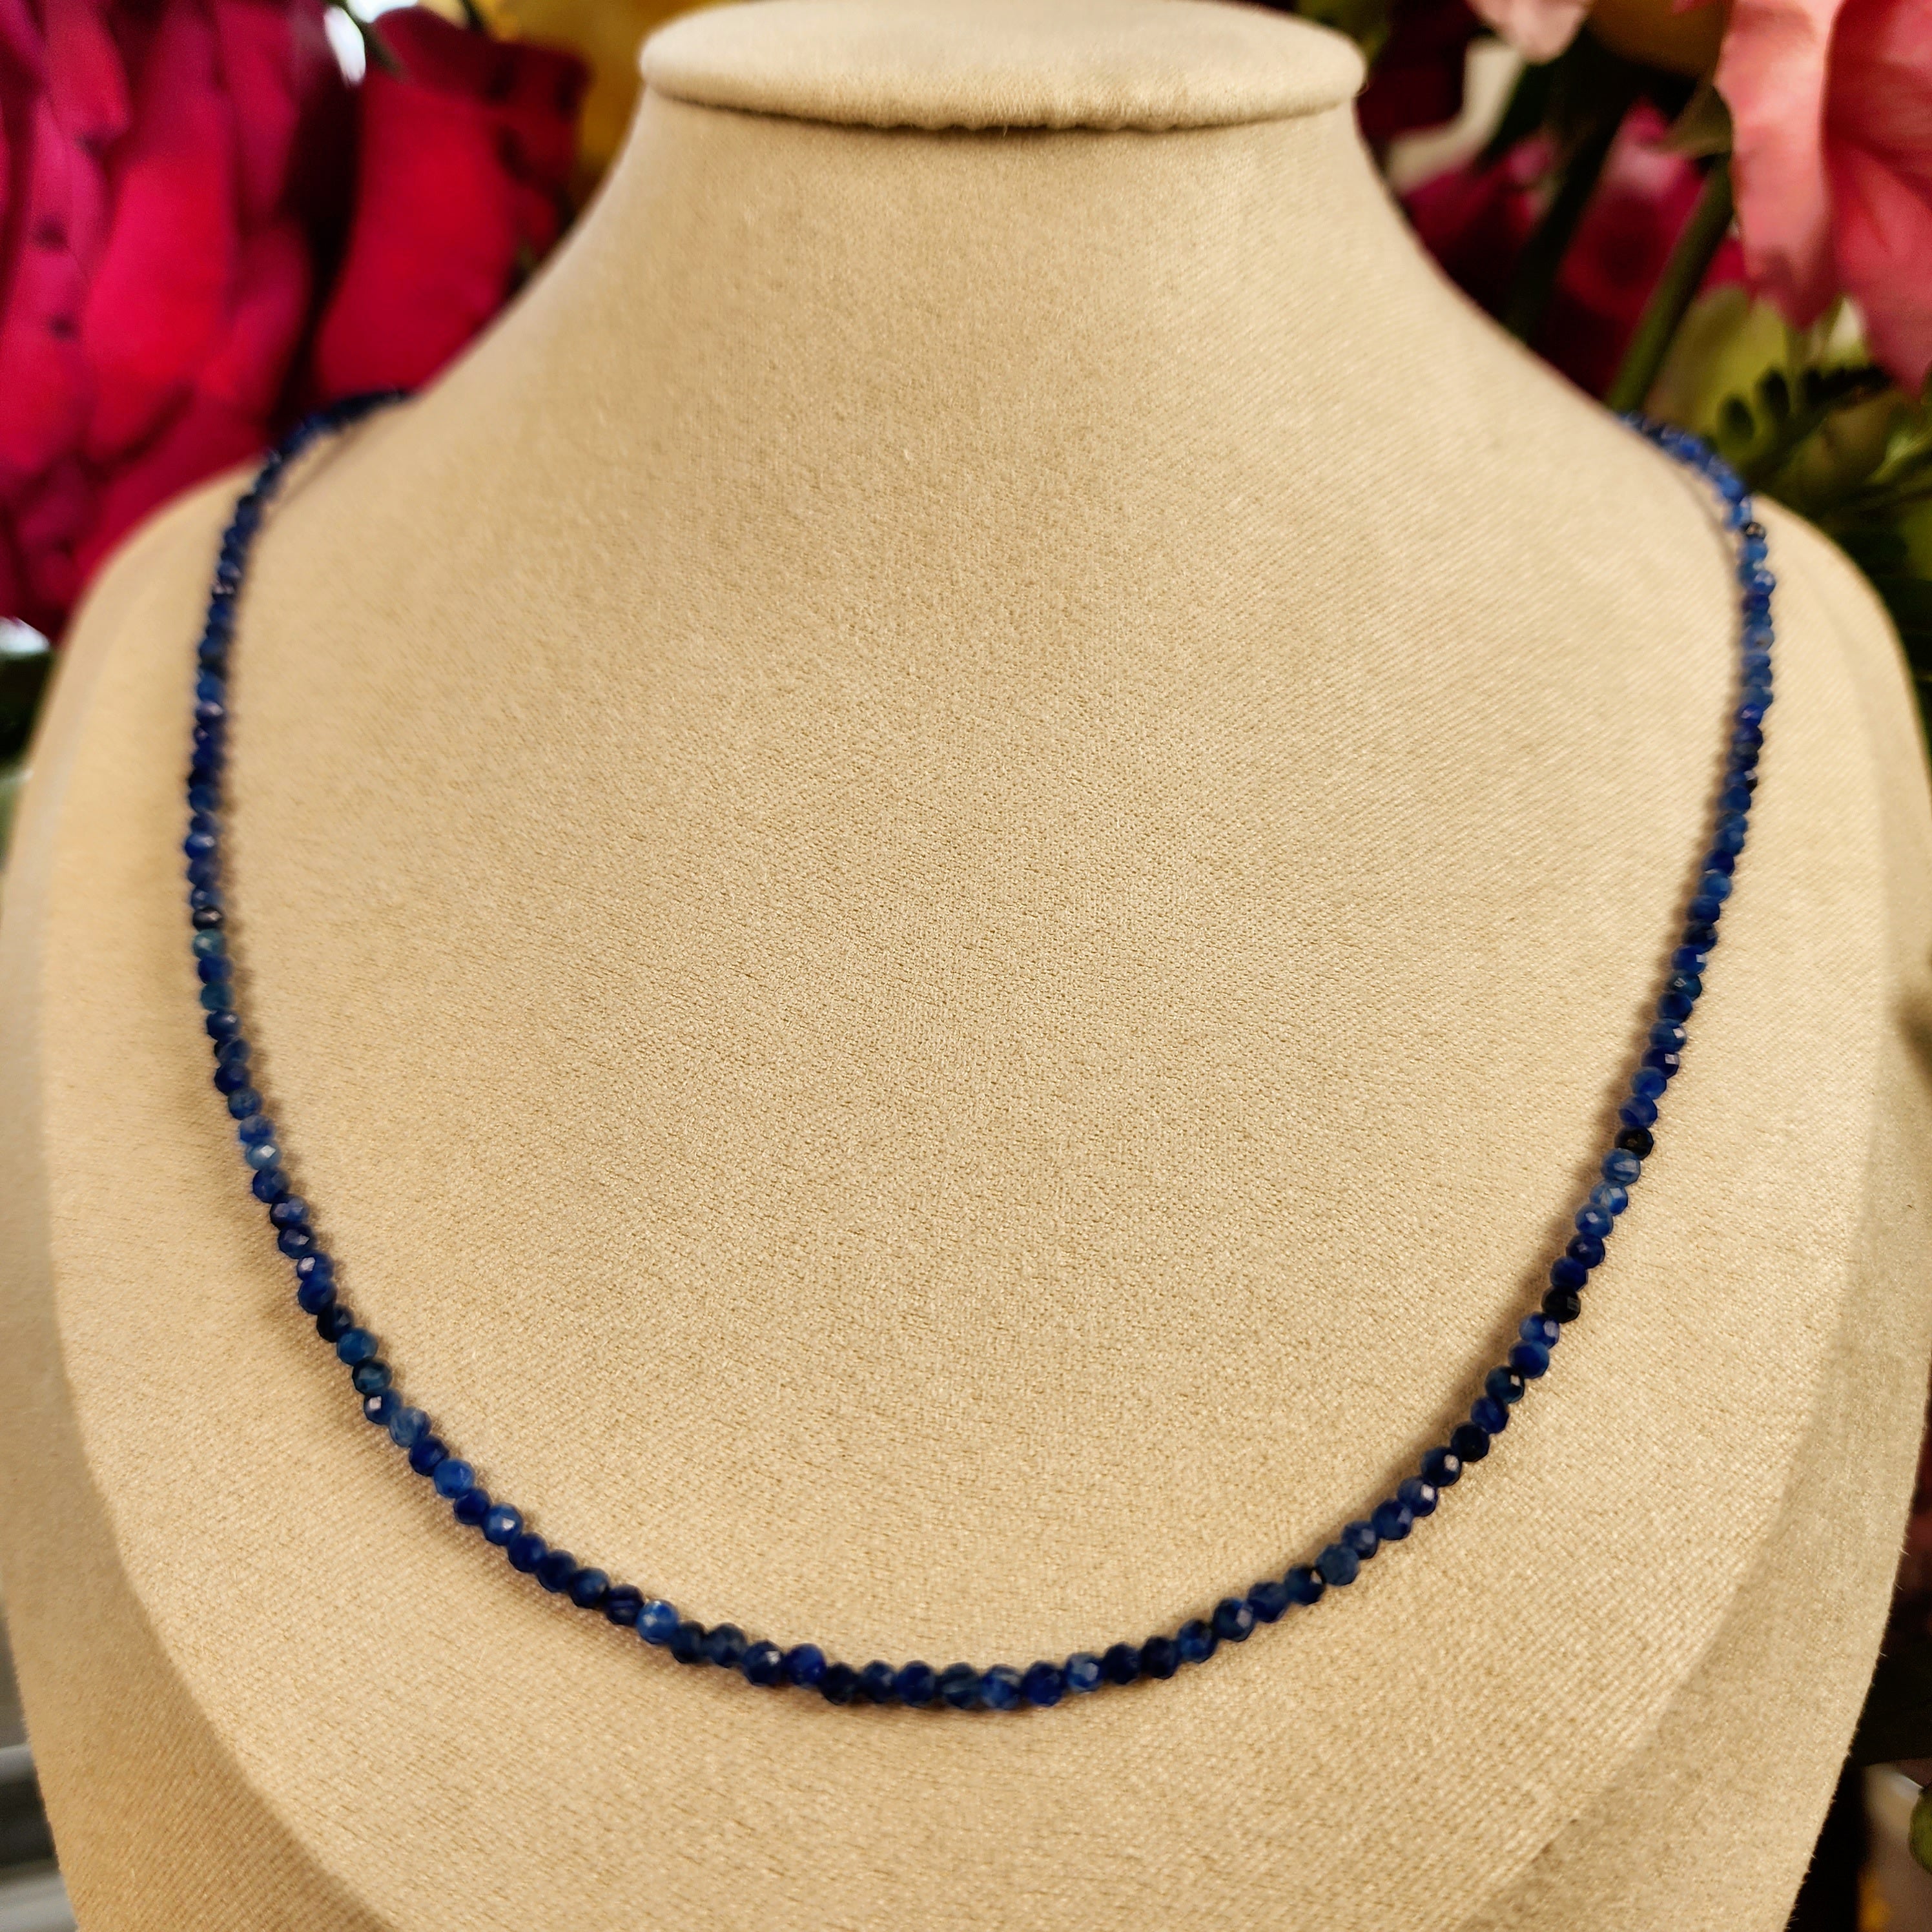 Blue Kyanite Micro Faceted Choker/Layering Necklace for Harmony and Empathy in Communication